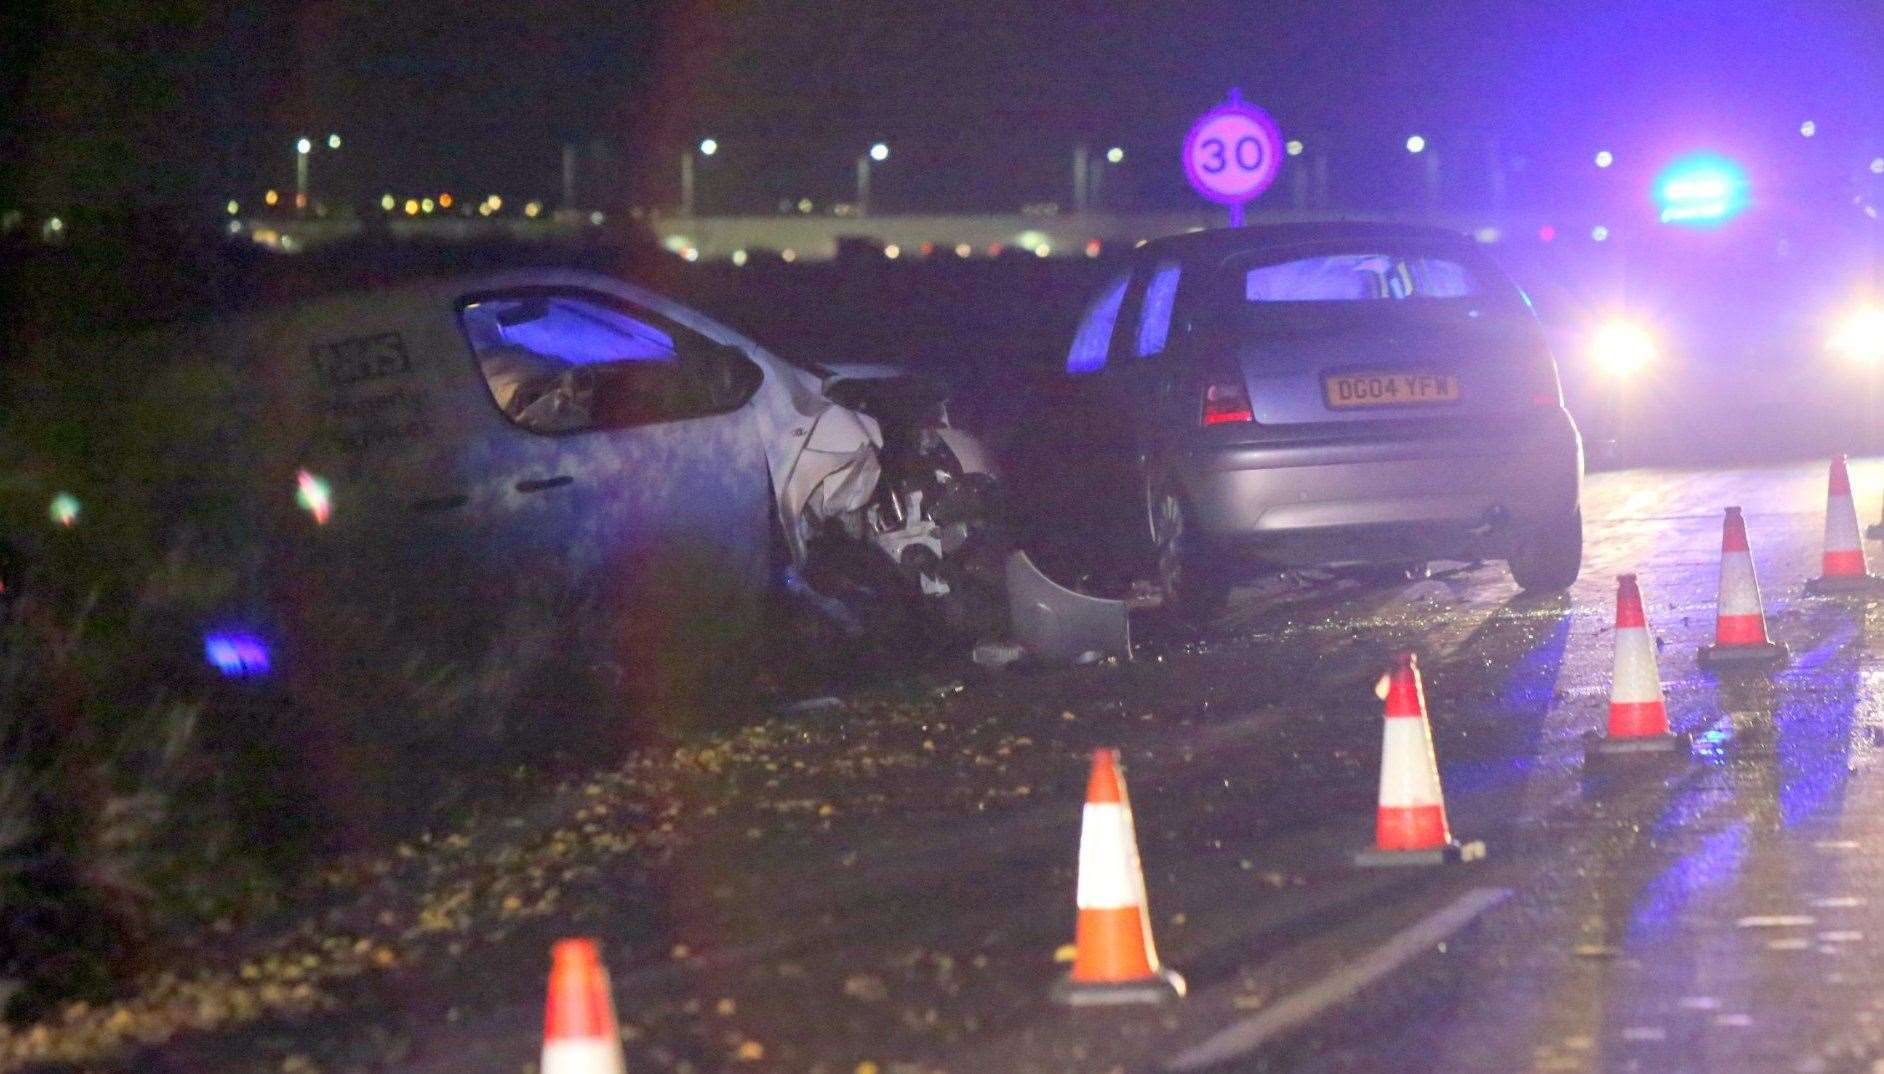 The aftermath of the crash. Picture: UK News in Pictures